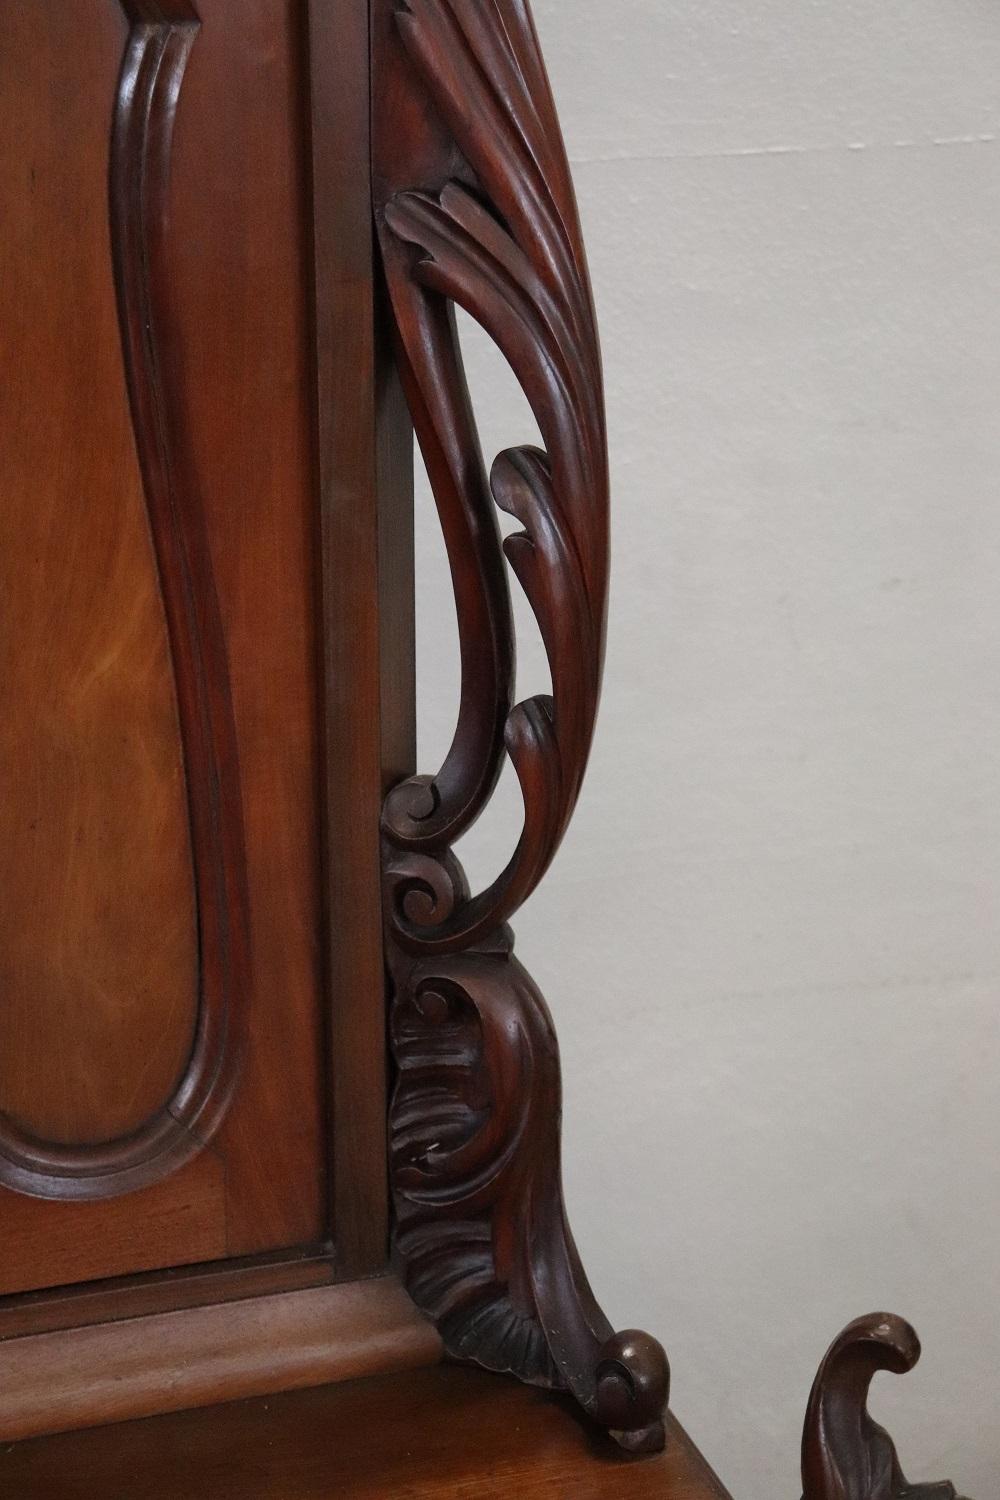 Late 19th Century Rare Italian Art Nouveau Carved Mahogany Sideboard or Cabinet